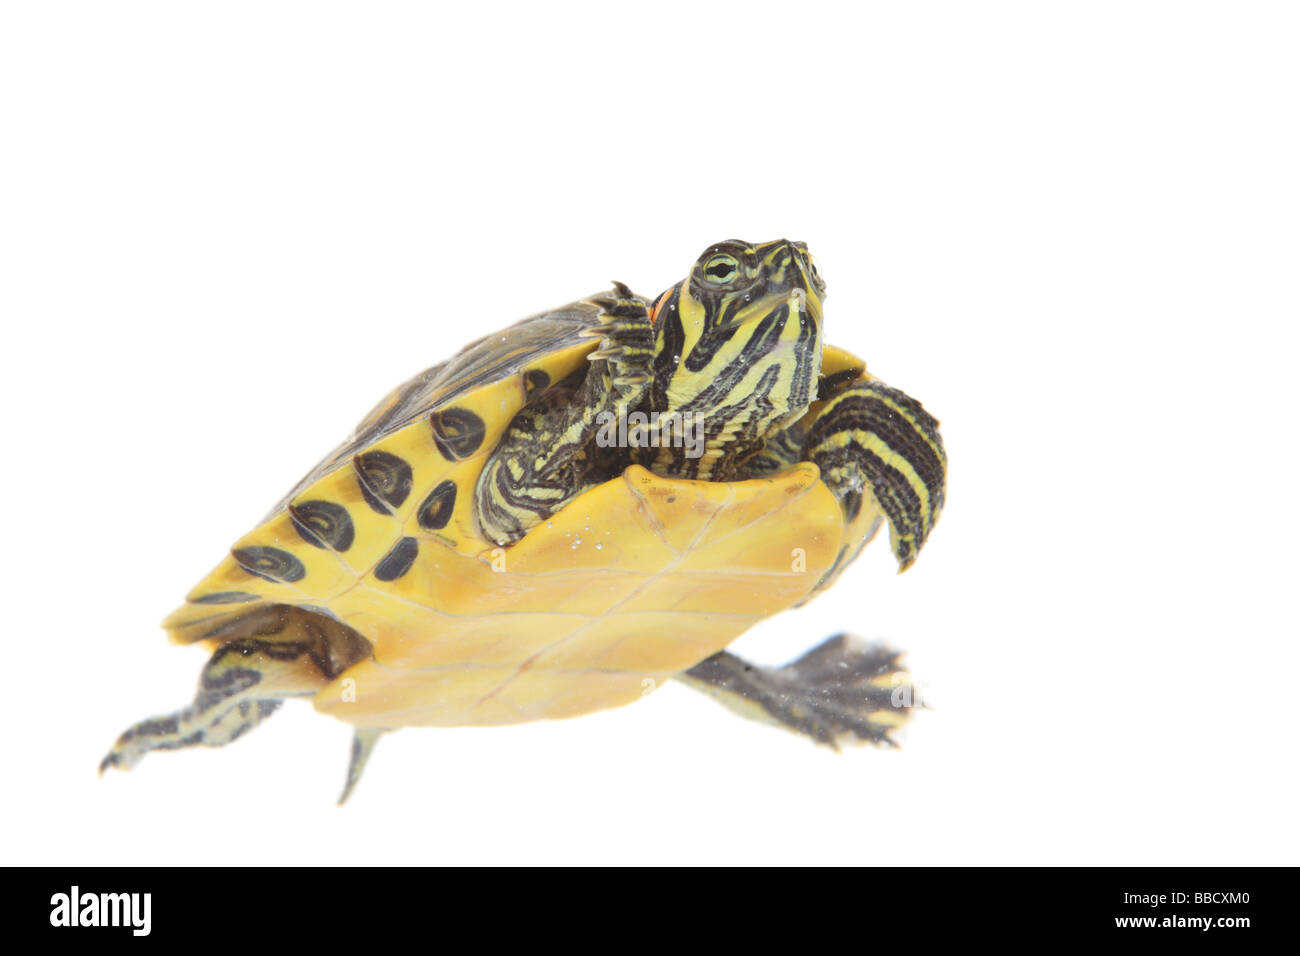 Water turtle isolated on white background Stock Photo